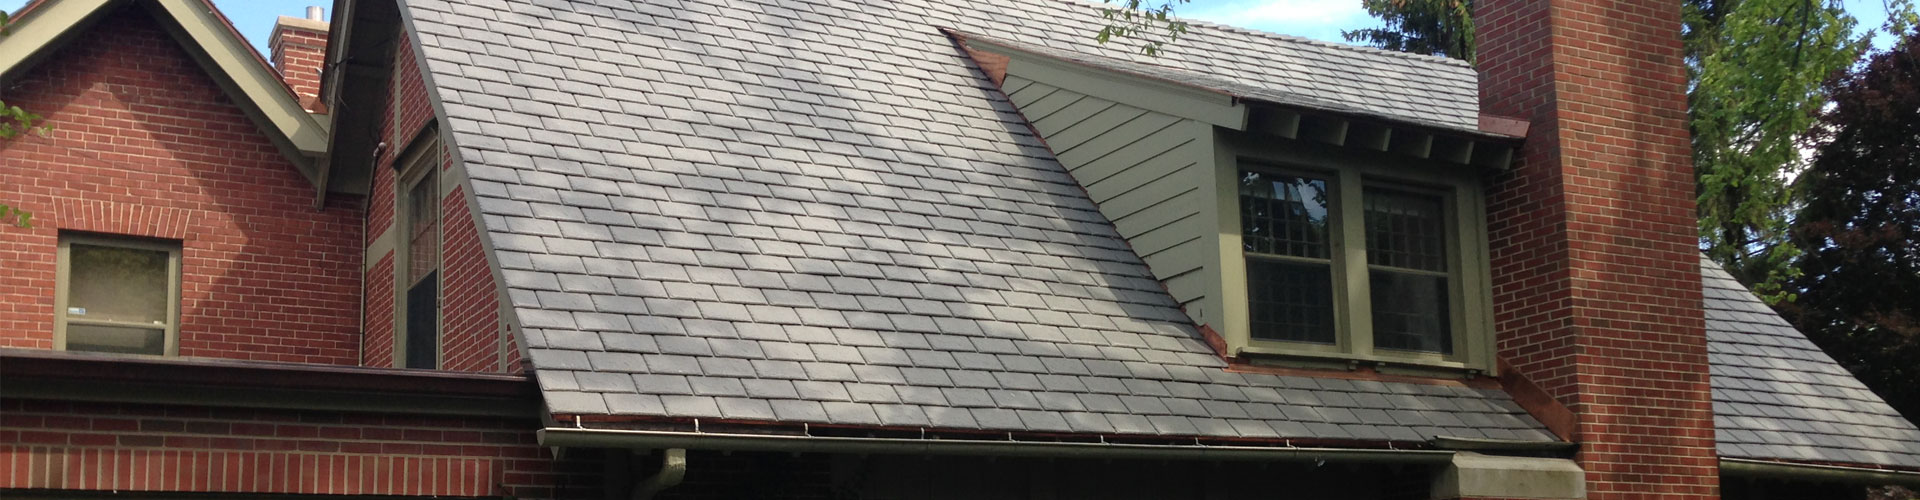 Large residential roofing job